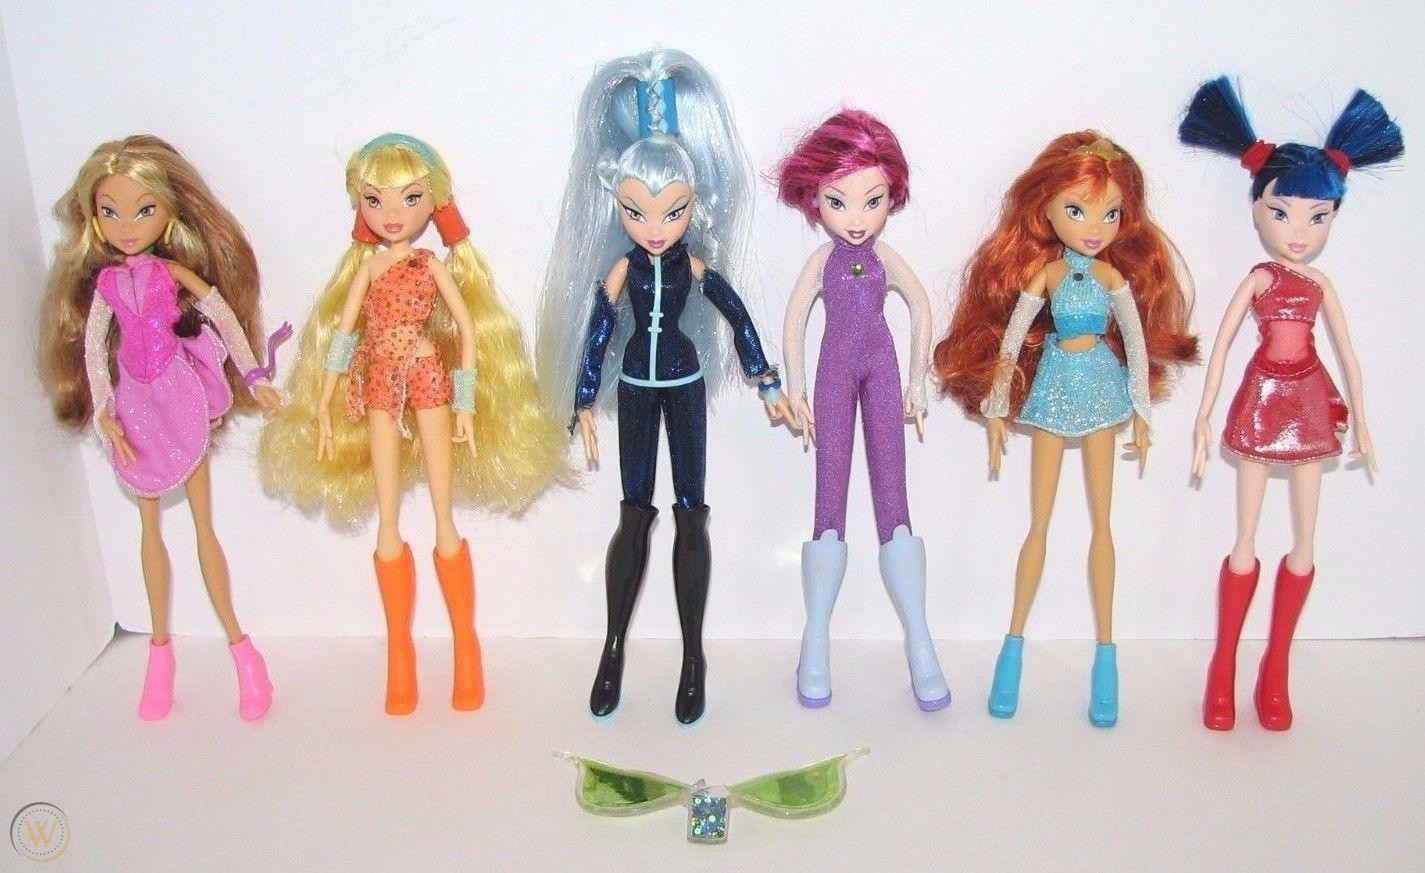 early 2000s dolls